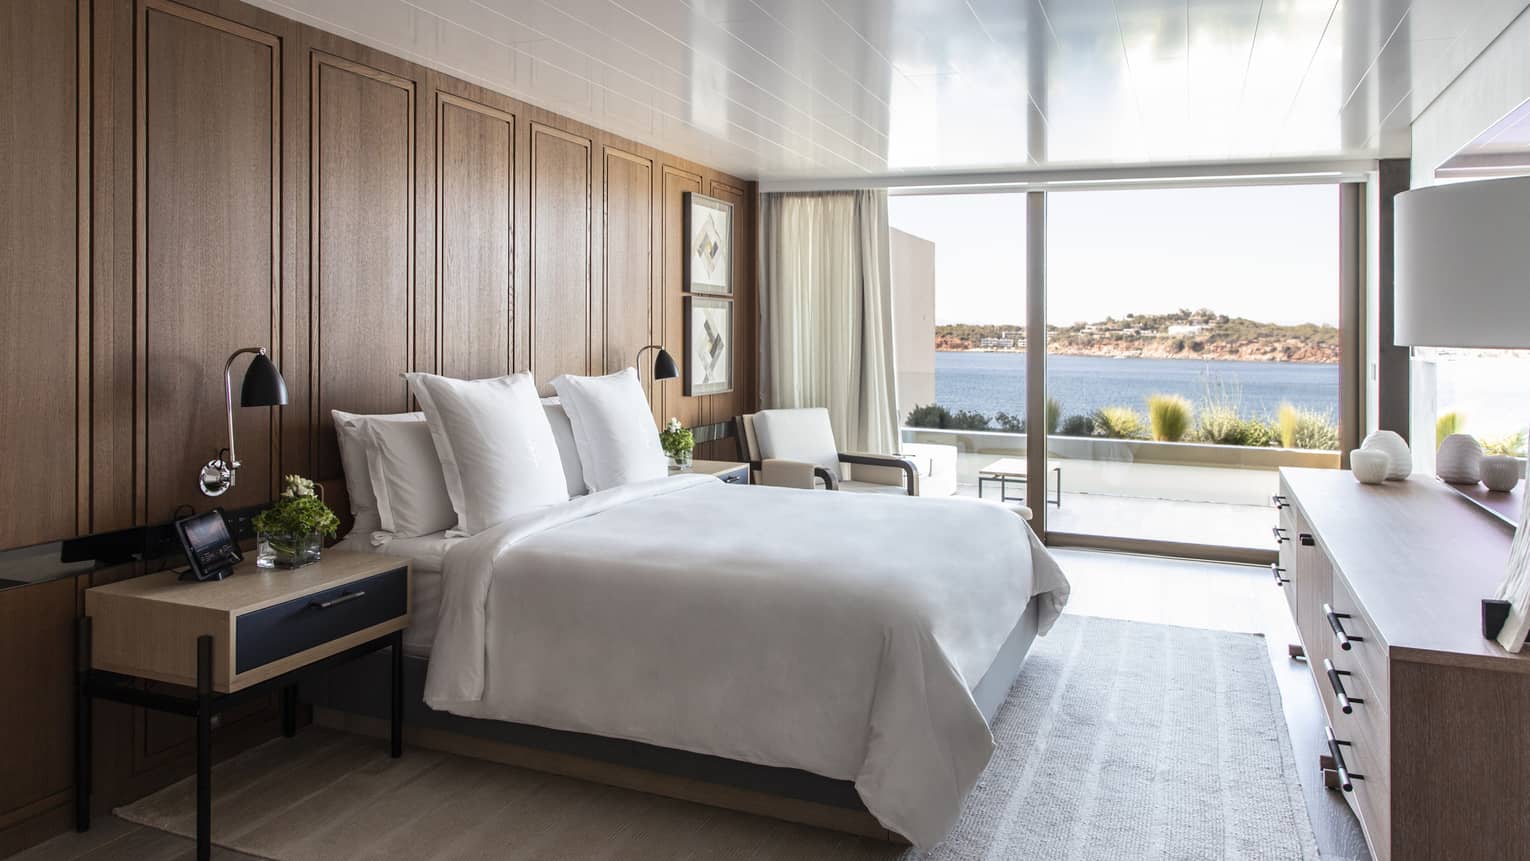 White king bed, wooden accent wall, contemporary night stand and dresser, wall of windows with sea view